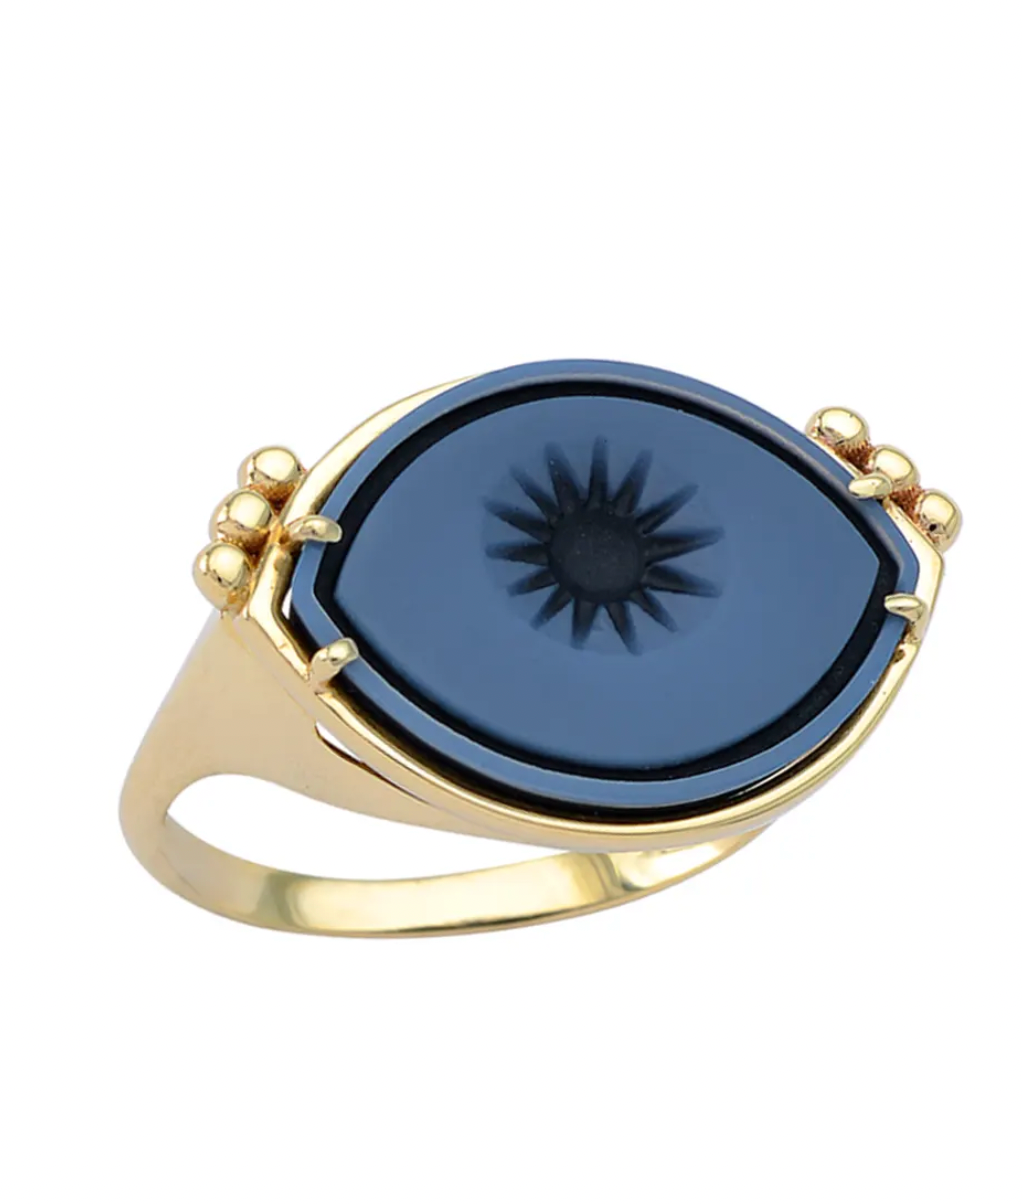 Cycladic Talisman 14K Gold Ring with Cameo Eye and 6 Gold Dots